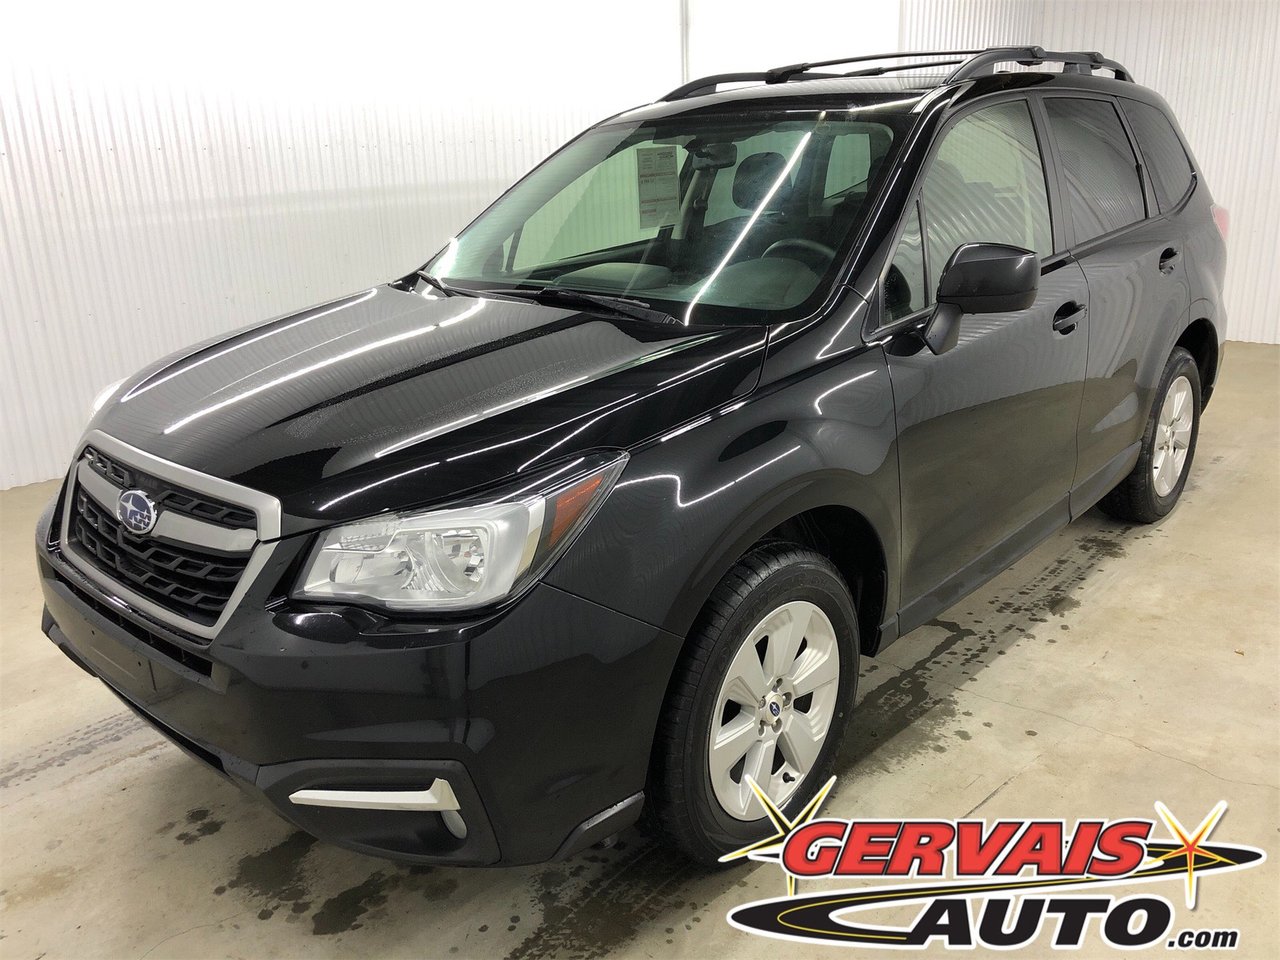  Subaru Forester CONVENIENCE AWD MAGS